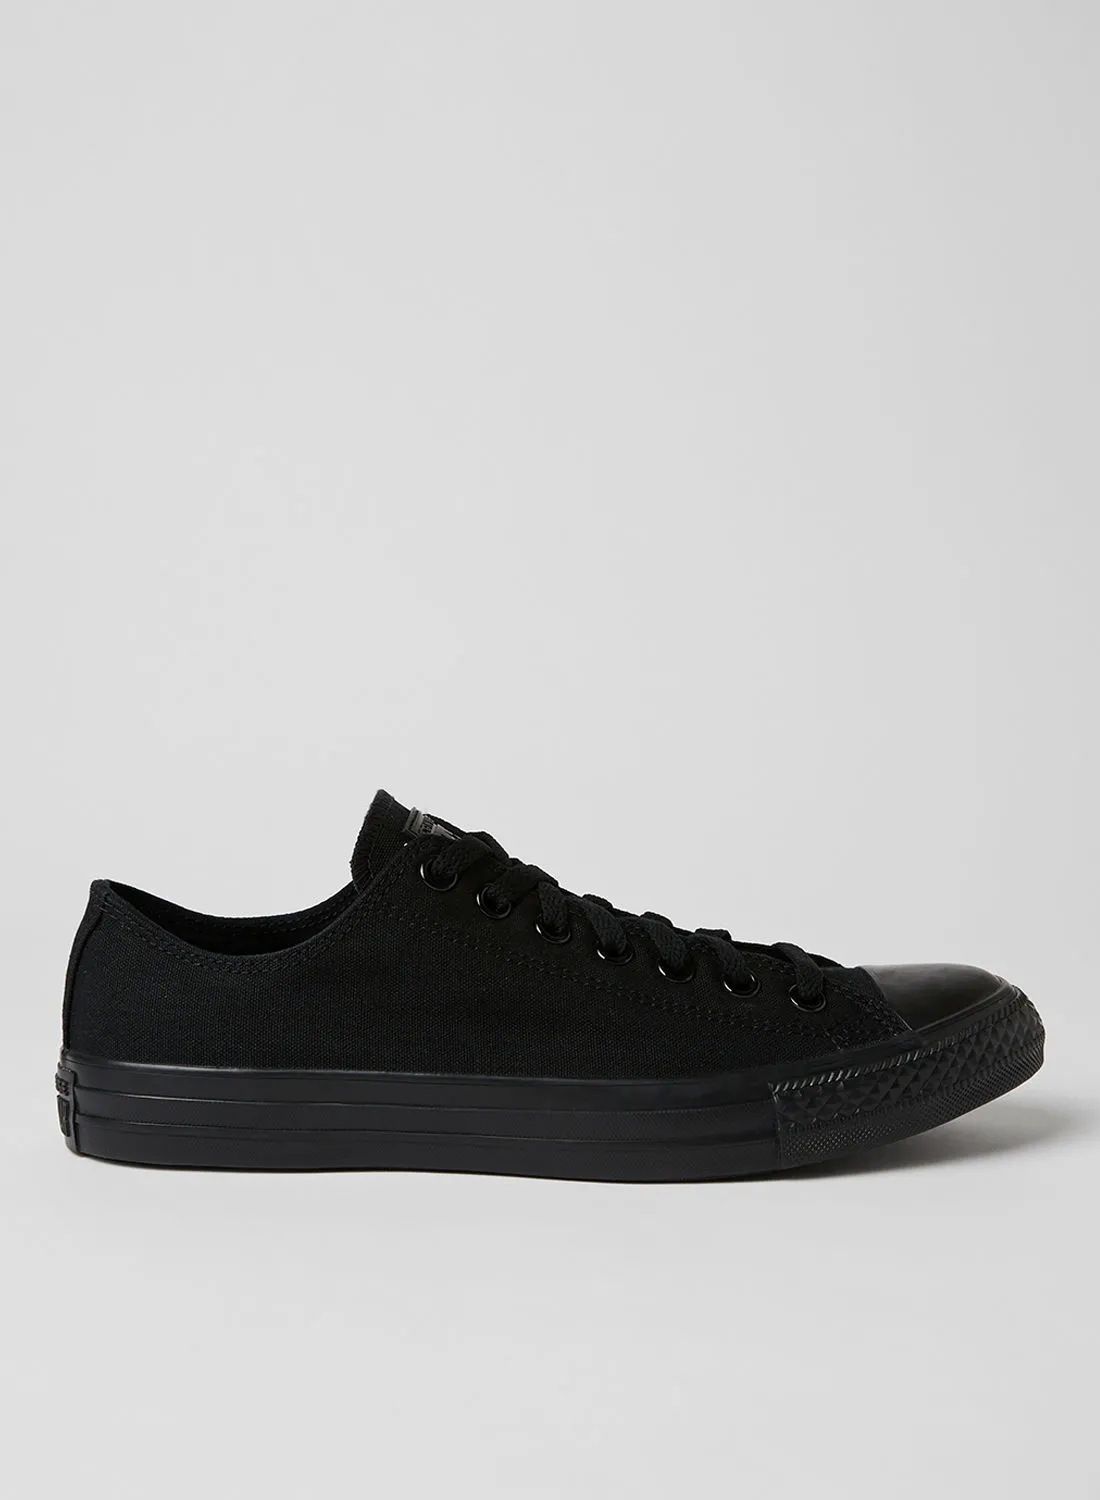 CONVERSE Unisex Chuck Taylor All Star Core OX Sneakers Black